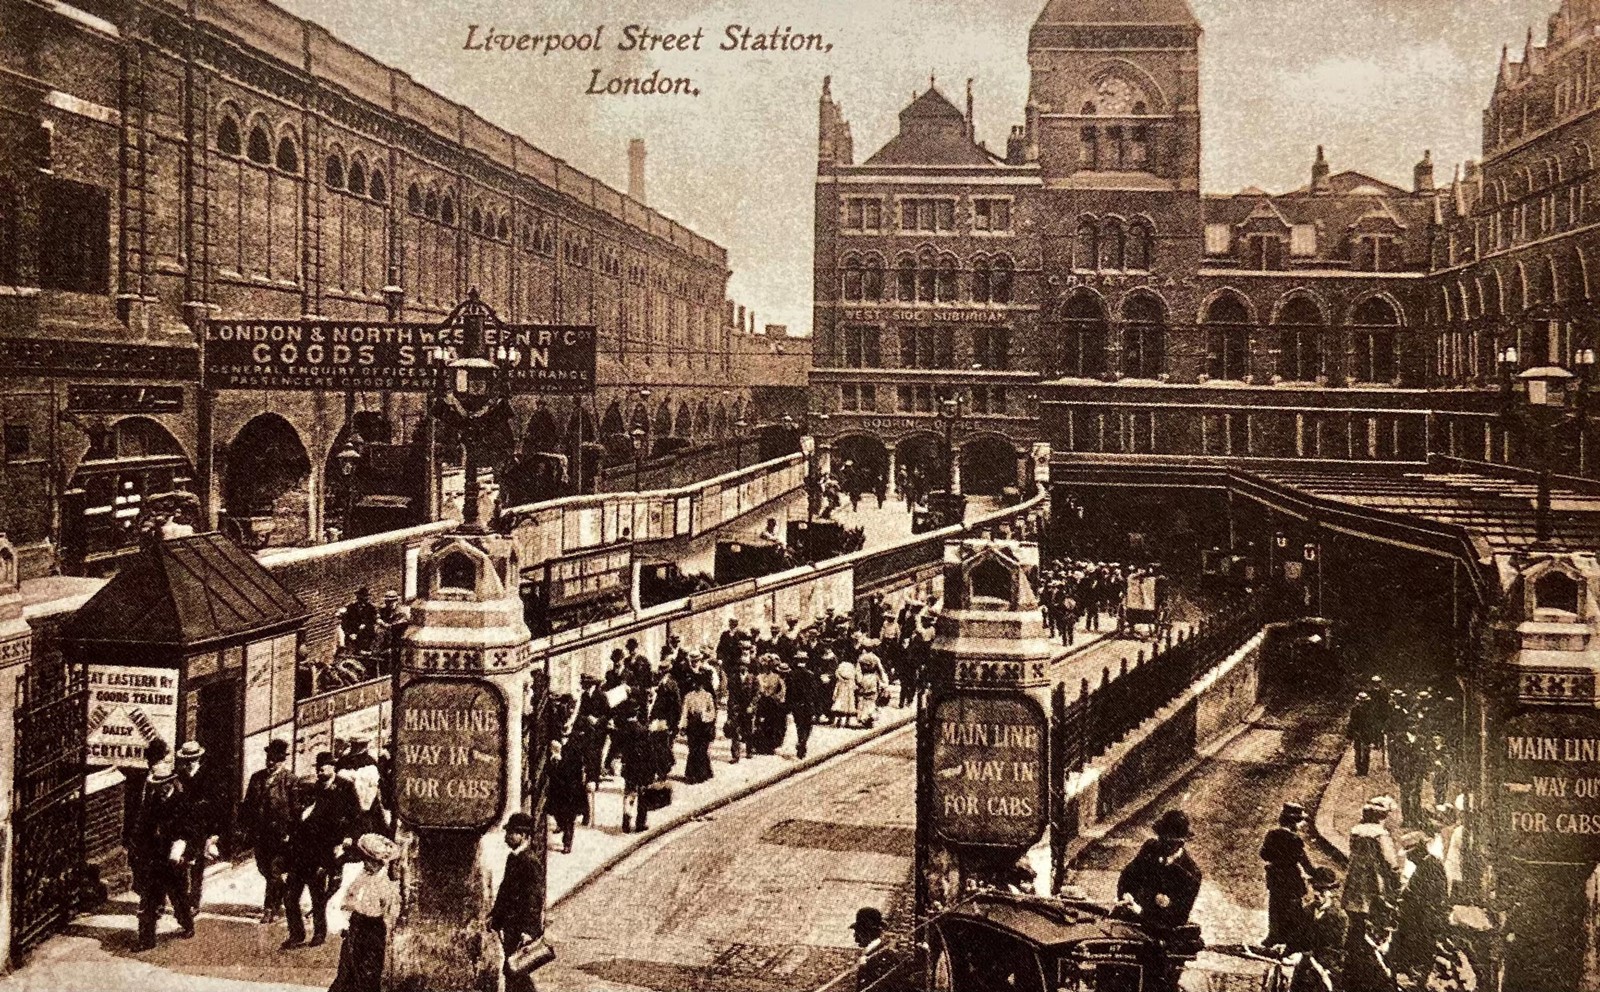 Archive photo of Liverpool Street Station